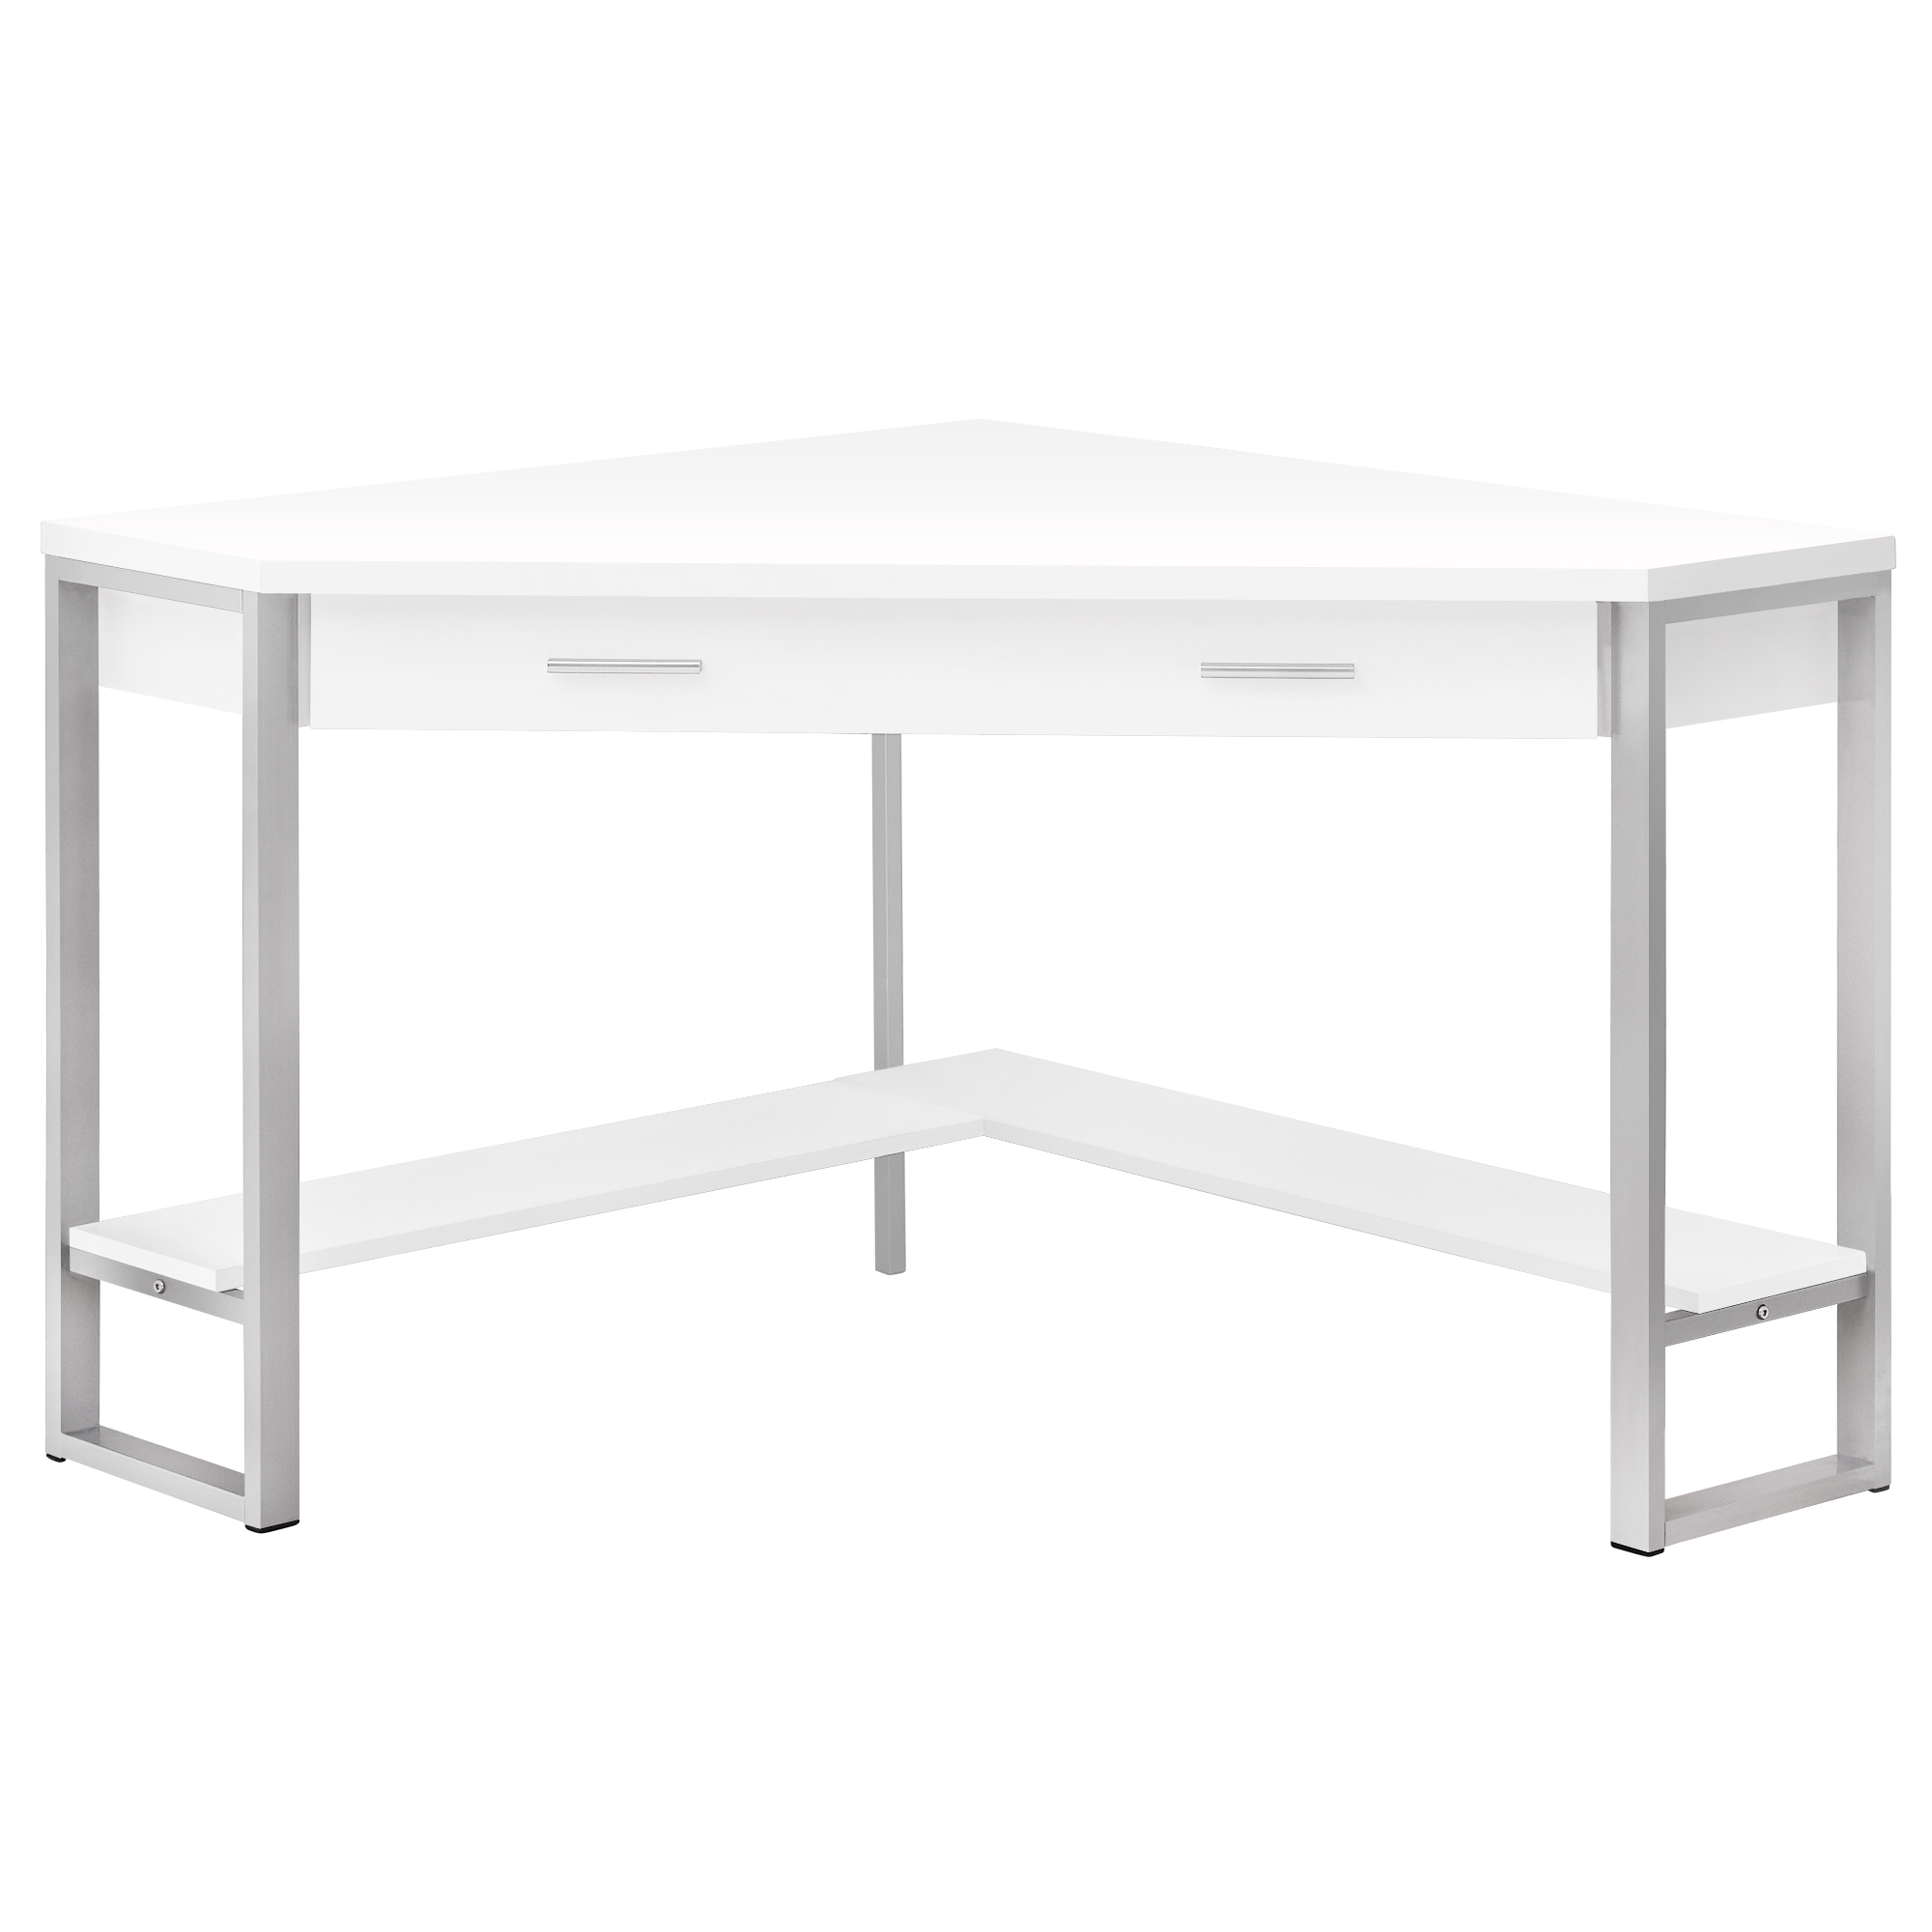 42" x 42" x 30" WhitewithSilver Metal Computer Desk